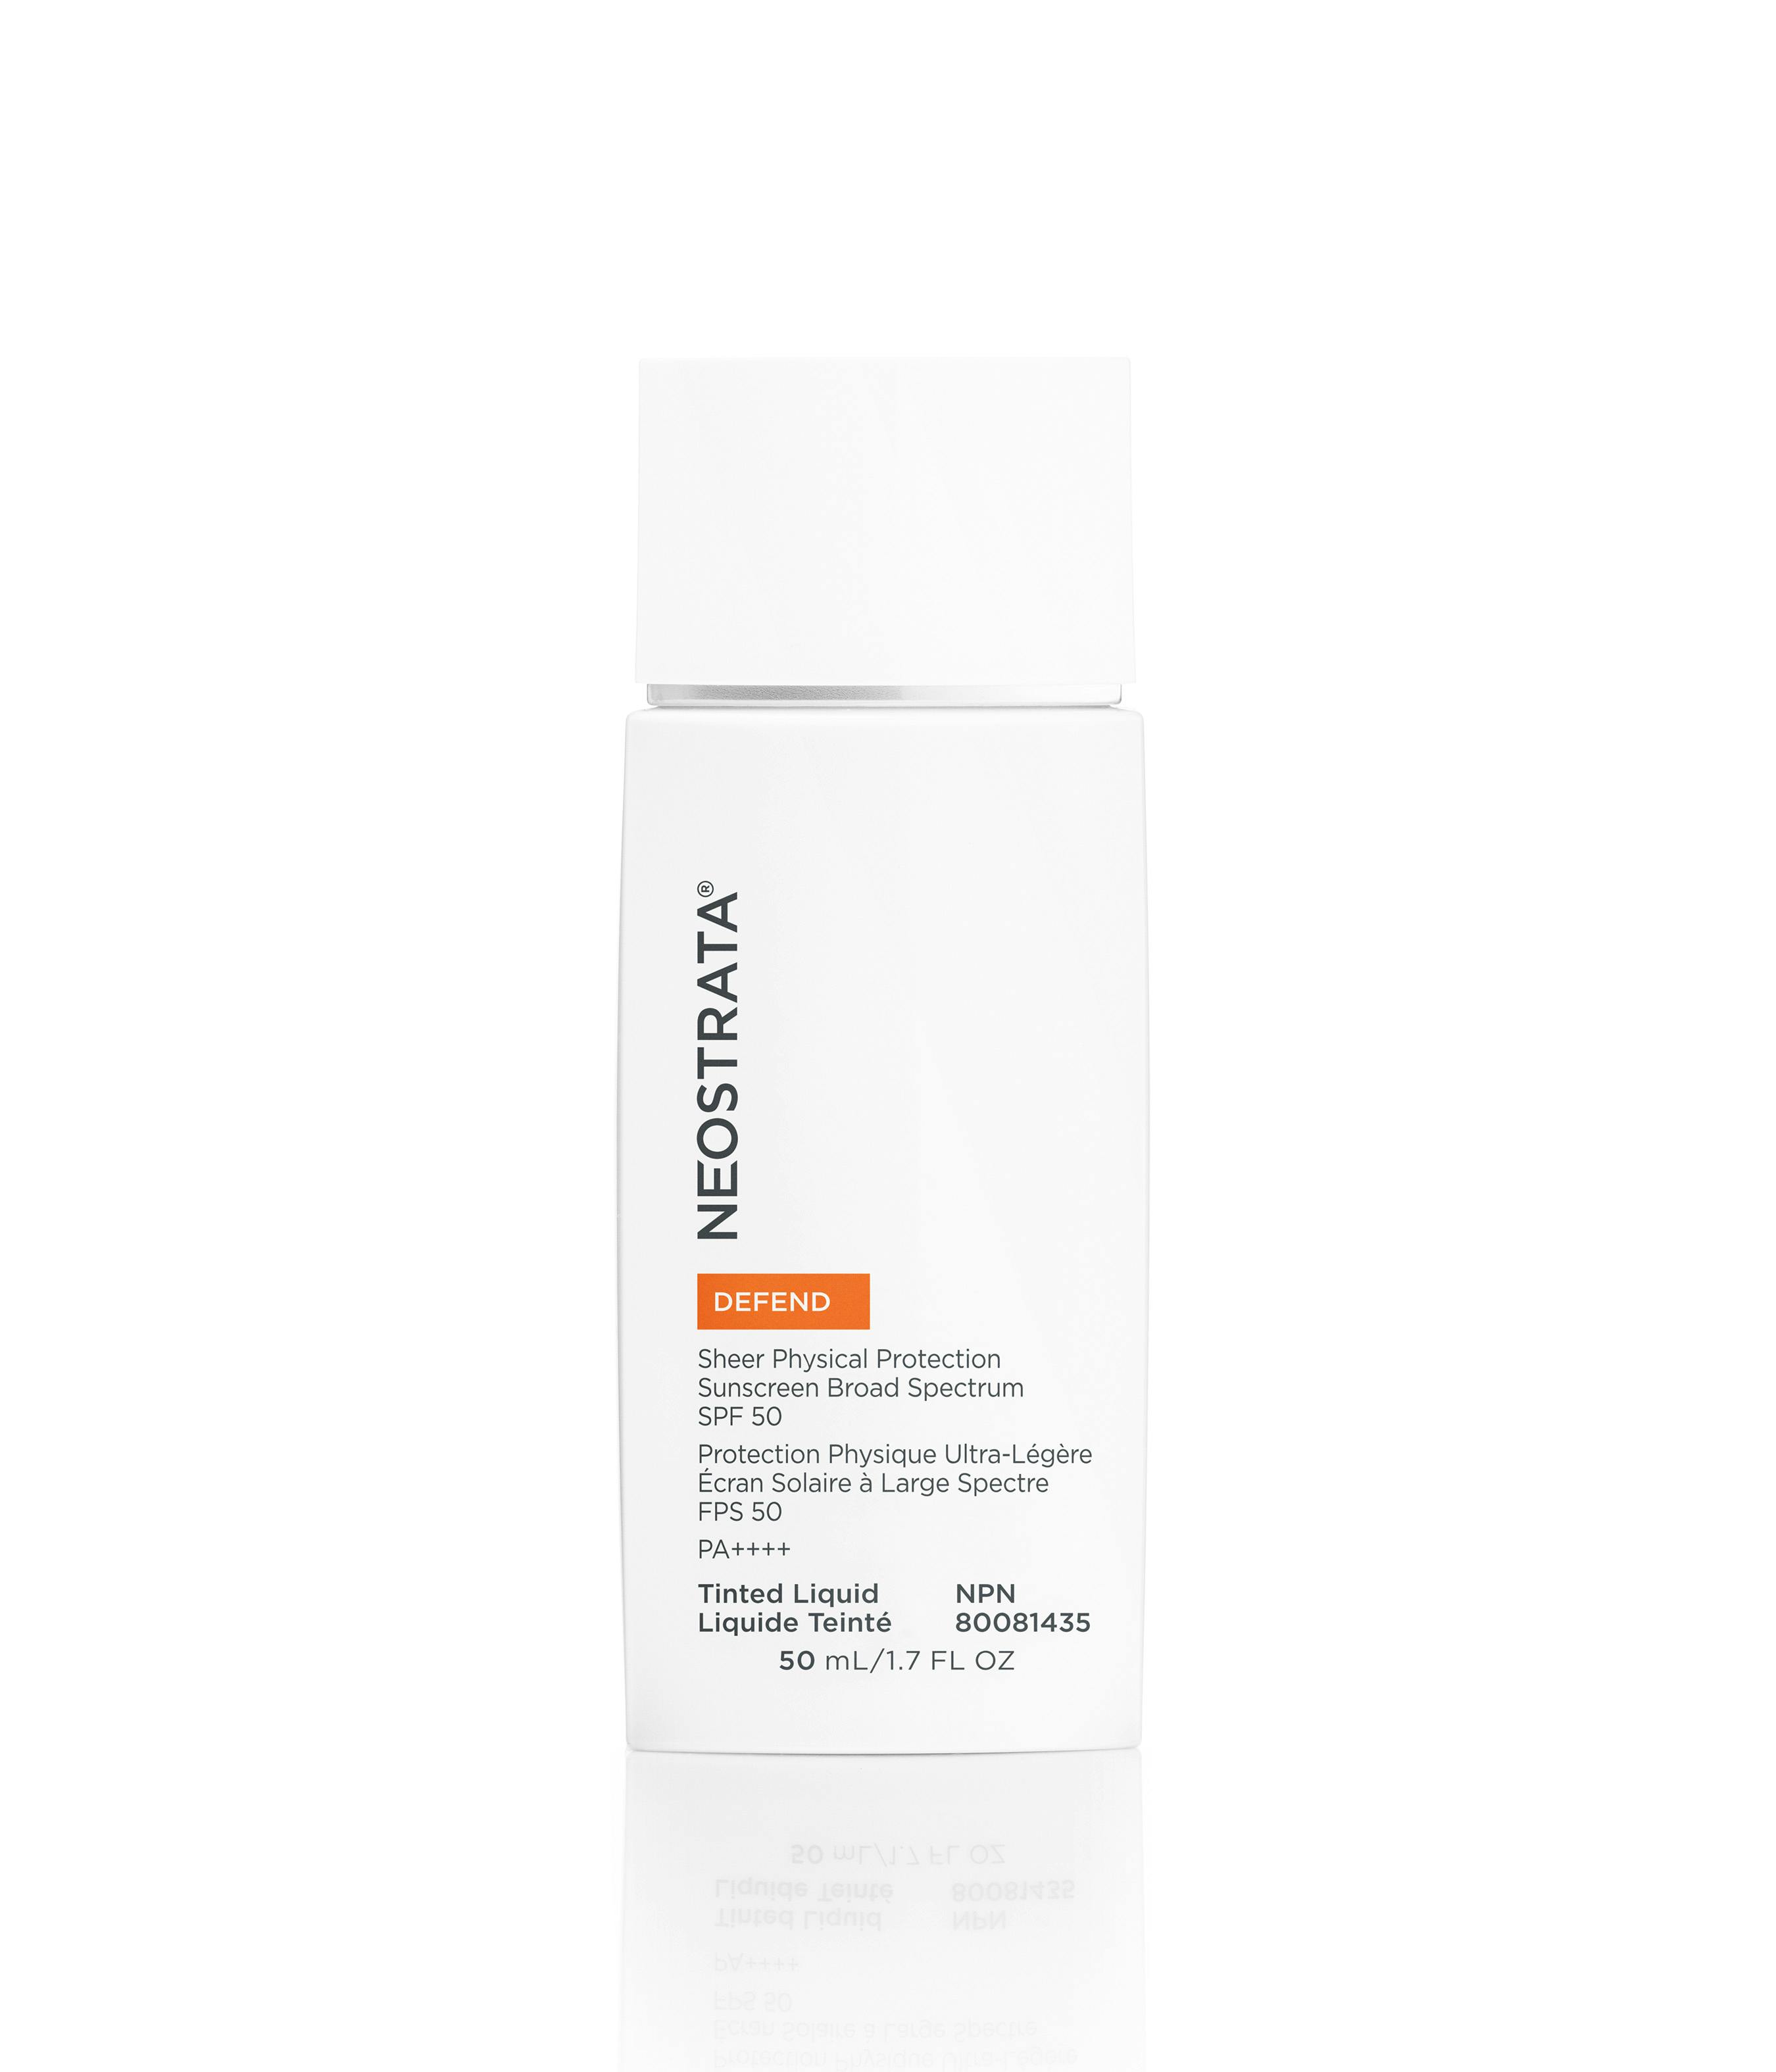 Sheer Physical Protection Sunscreen Broad Spectrum SPF 50